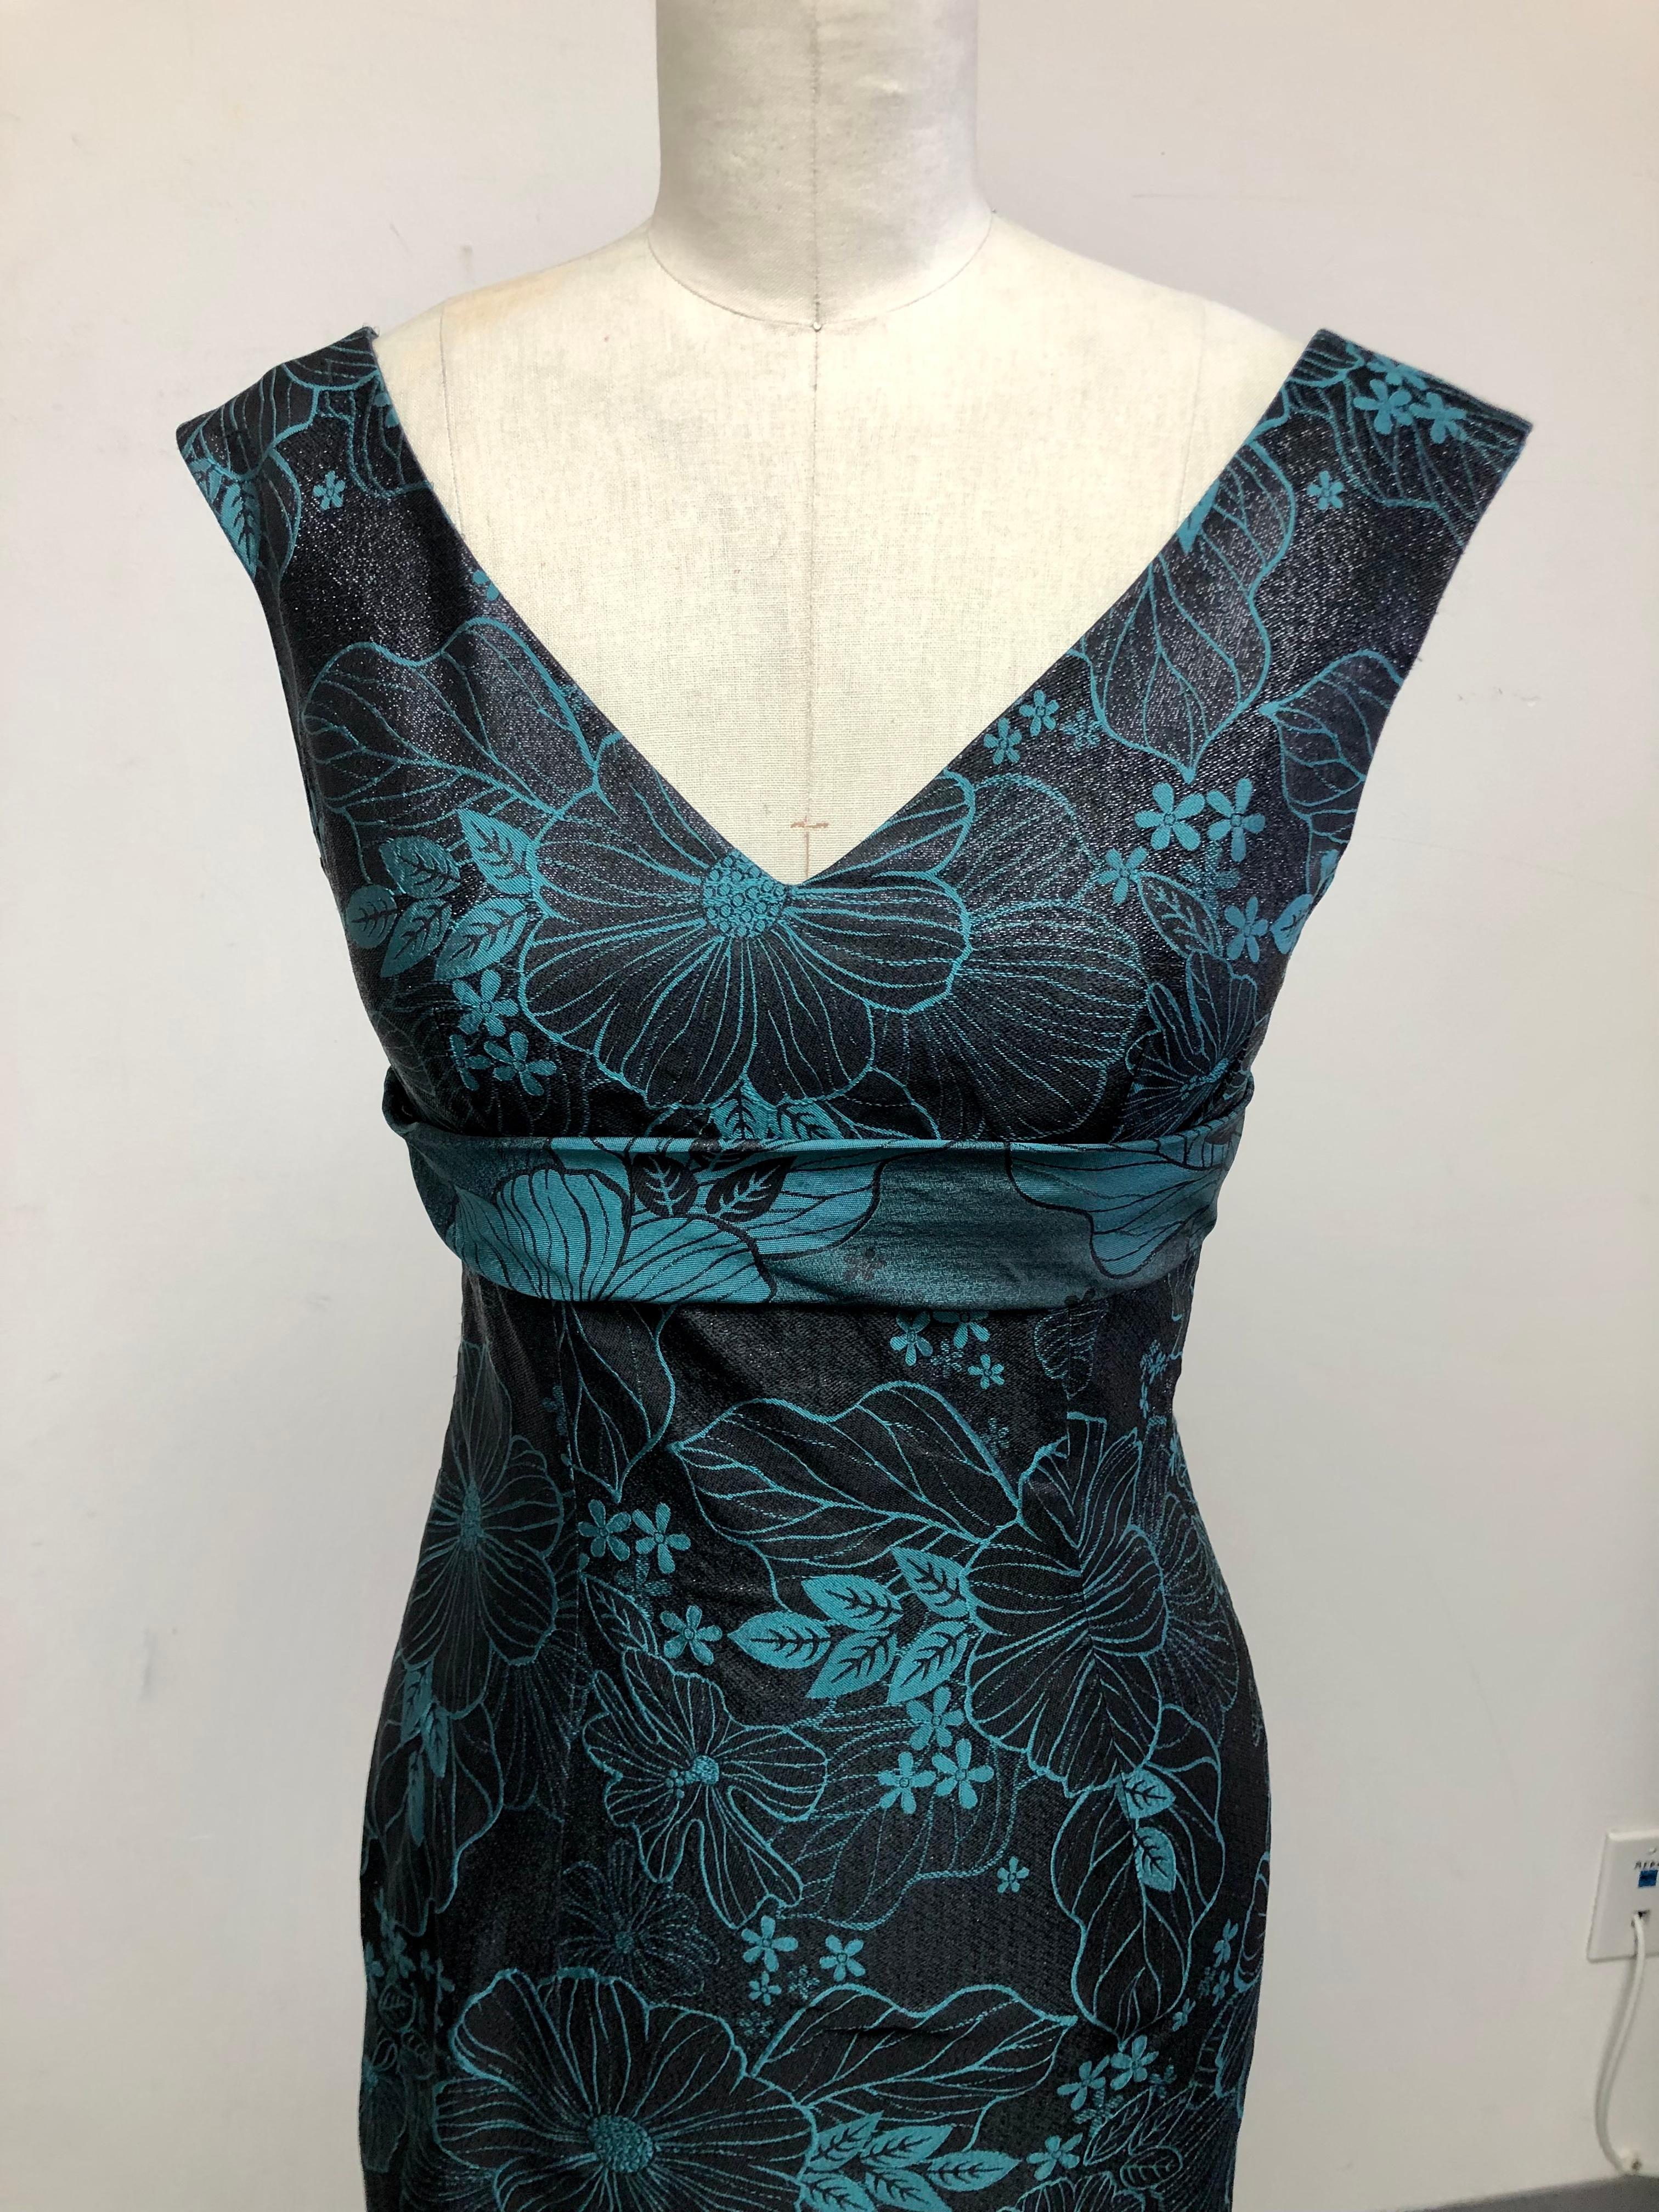 Deep double V Neck Slim Dress in Black Jet Brocade with Turquoise Floral Motif. Perfect for cocktails and even black tie. Wedding guest appropriate and truly charming low V back secured with a flat back bow for making a chic exit!  Season- less and